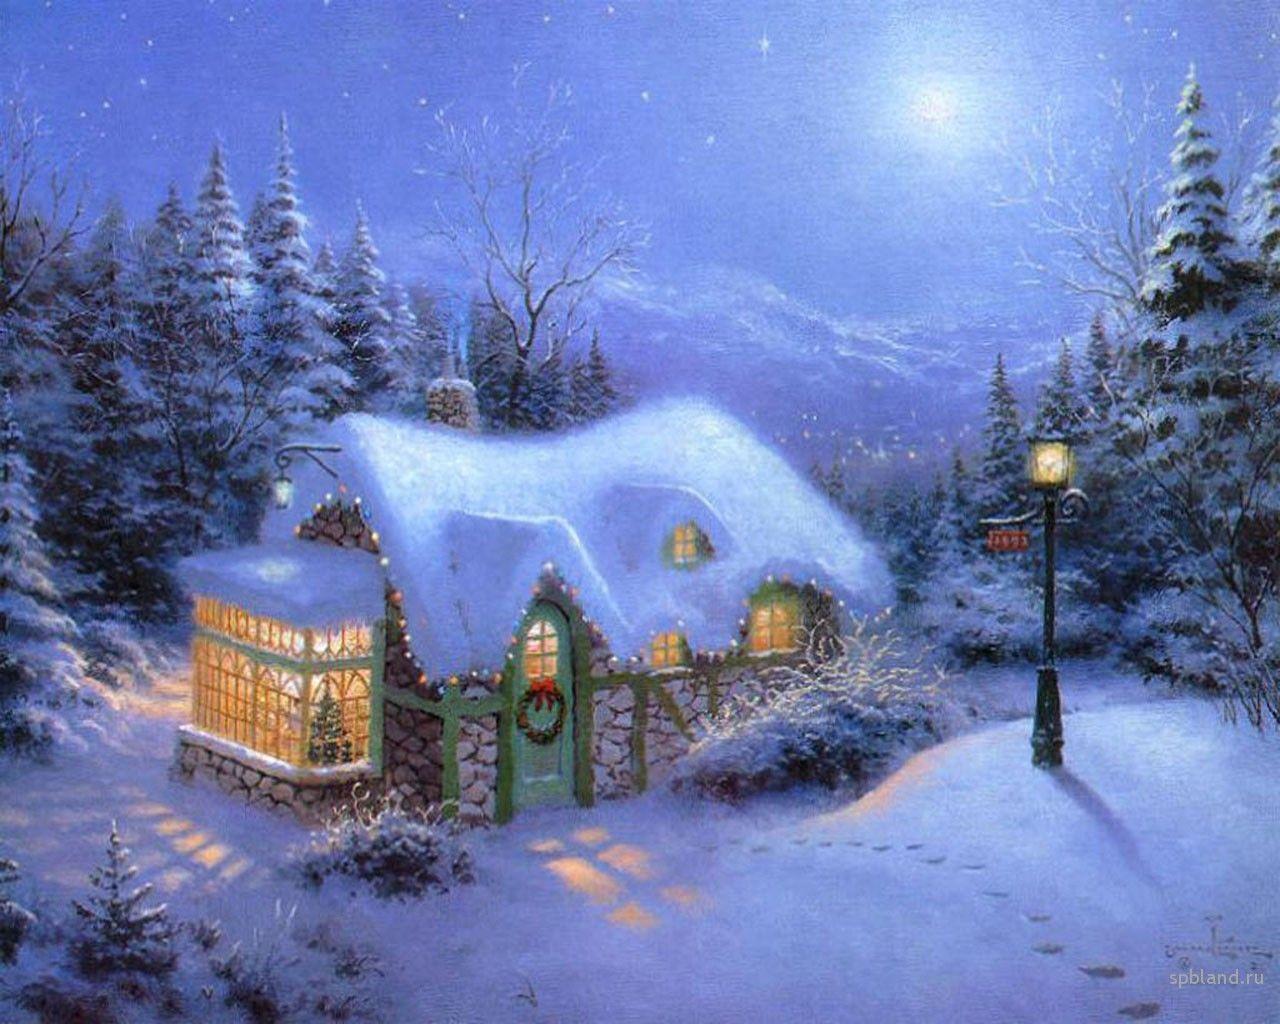 Gallery For > Christmas House Wallpaper